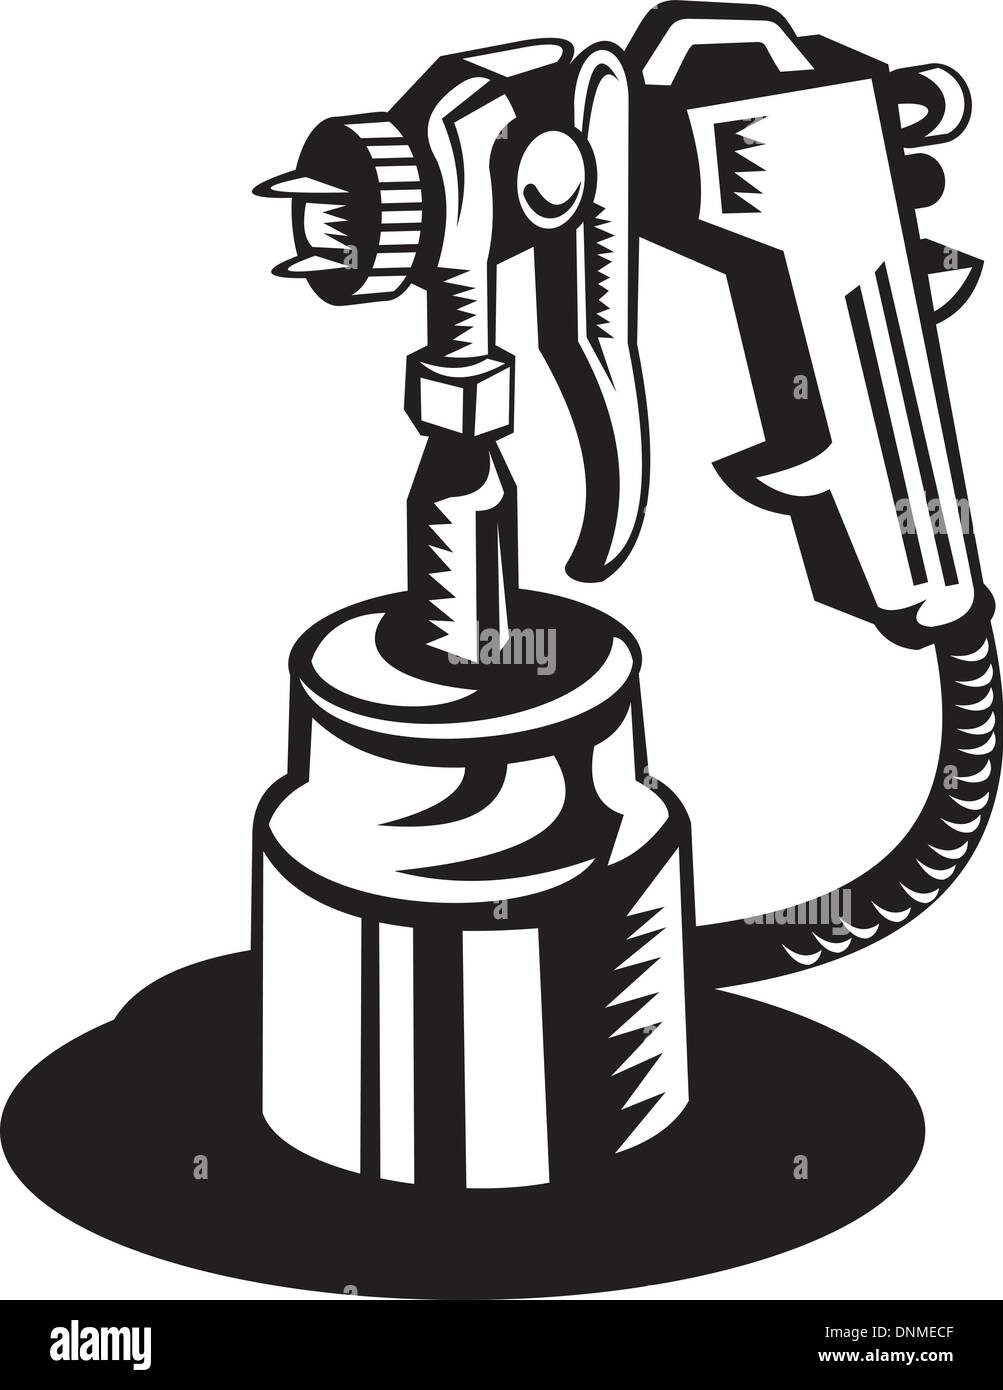 illustration of a Spray gun viewed from a high angle in black and white Stock Vector